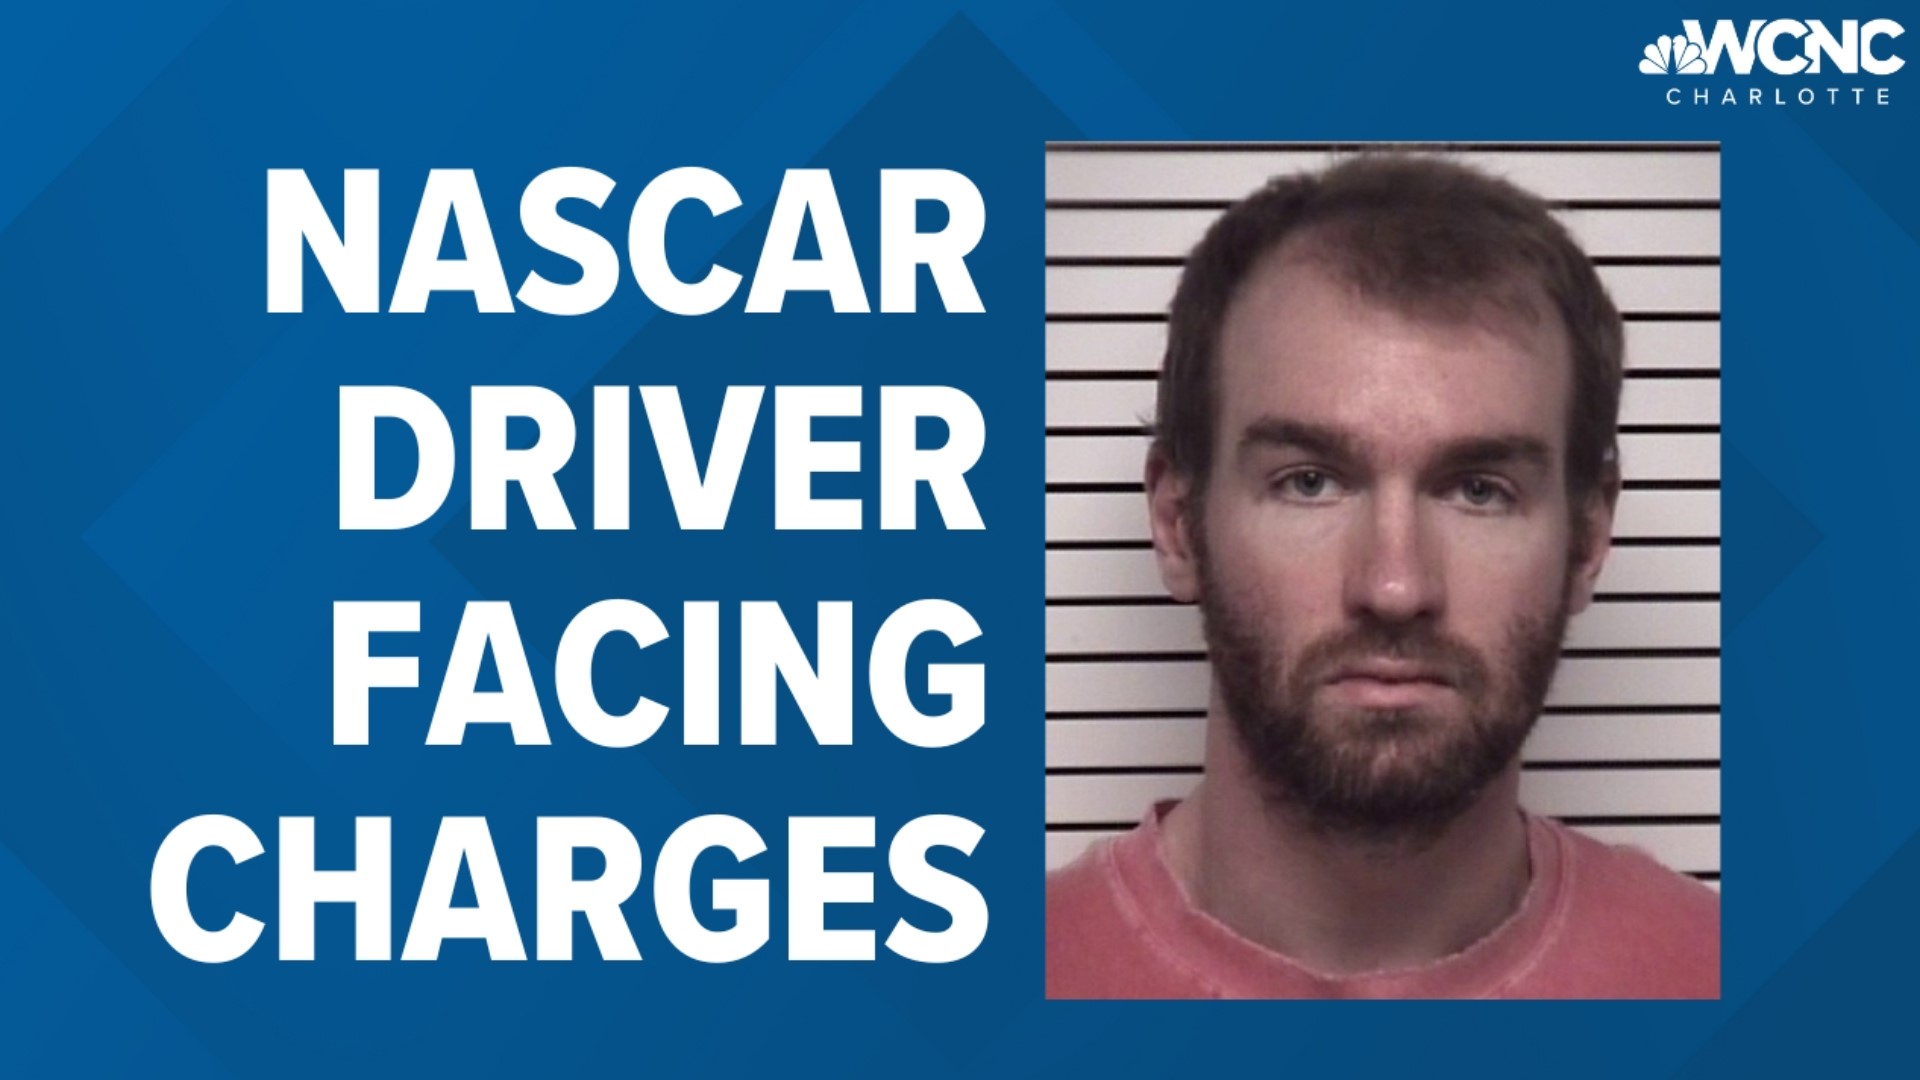 NASCAR suspended Cup Series driver Cody Ware indefinitely after he was arrested in Iredell County, NC on charges of assault on a female and assault by strangulation.